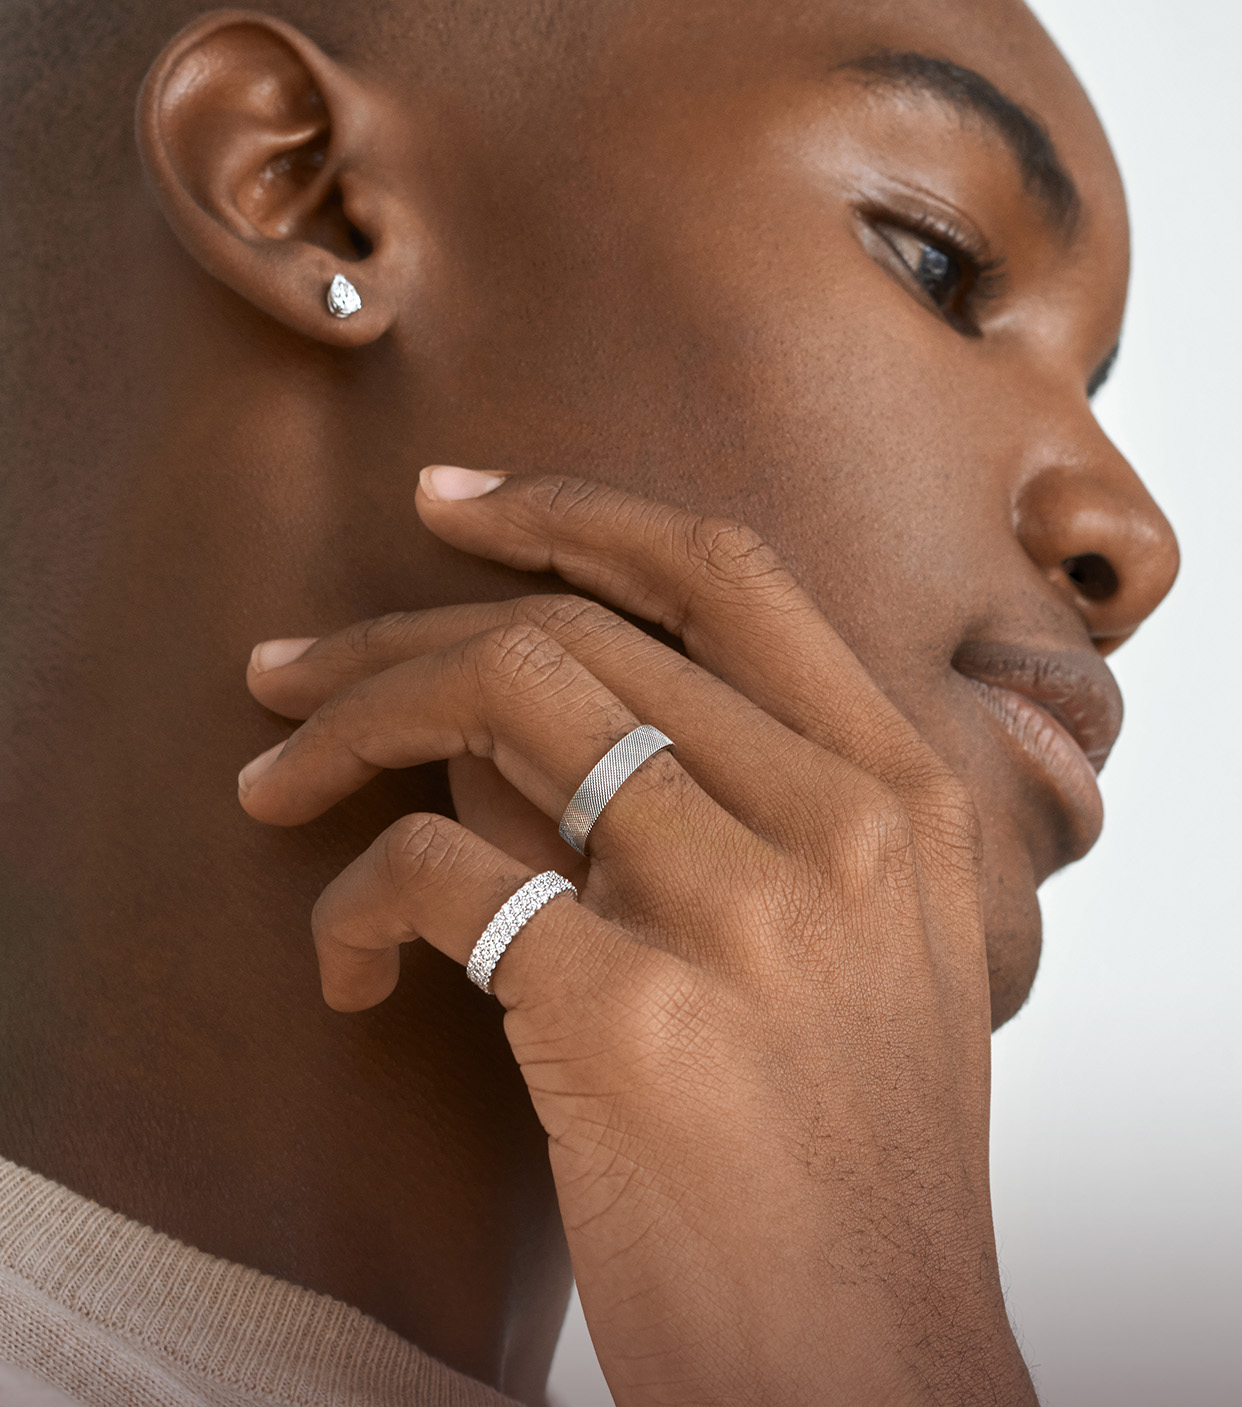 Model wearing white gold and diamond wedding bands, and diamond stud earrings.